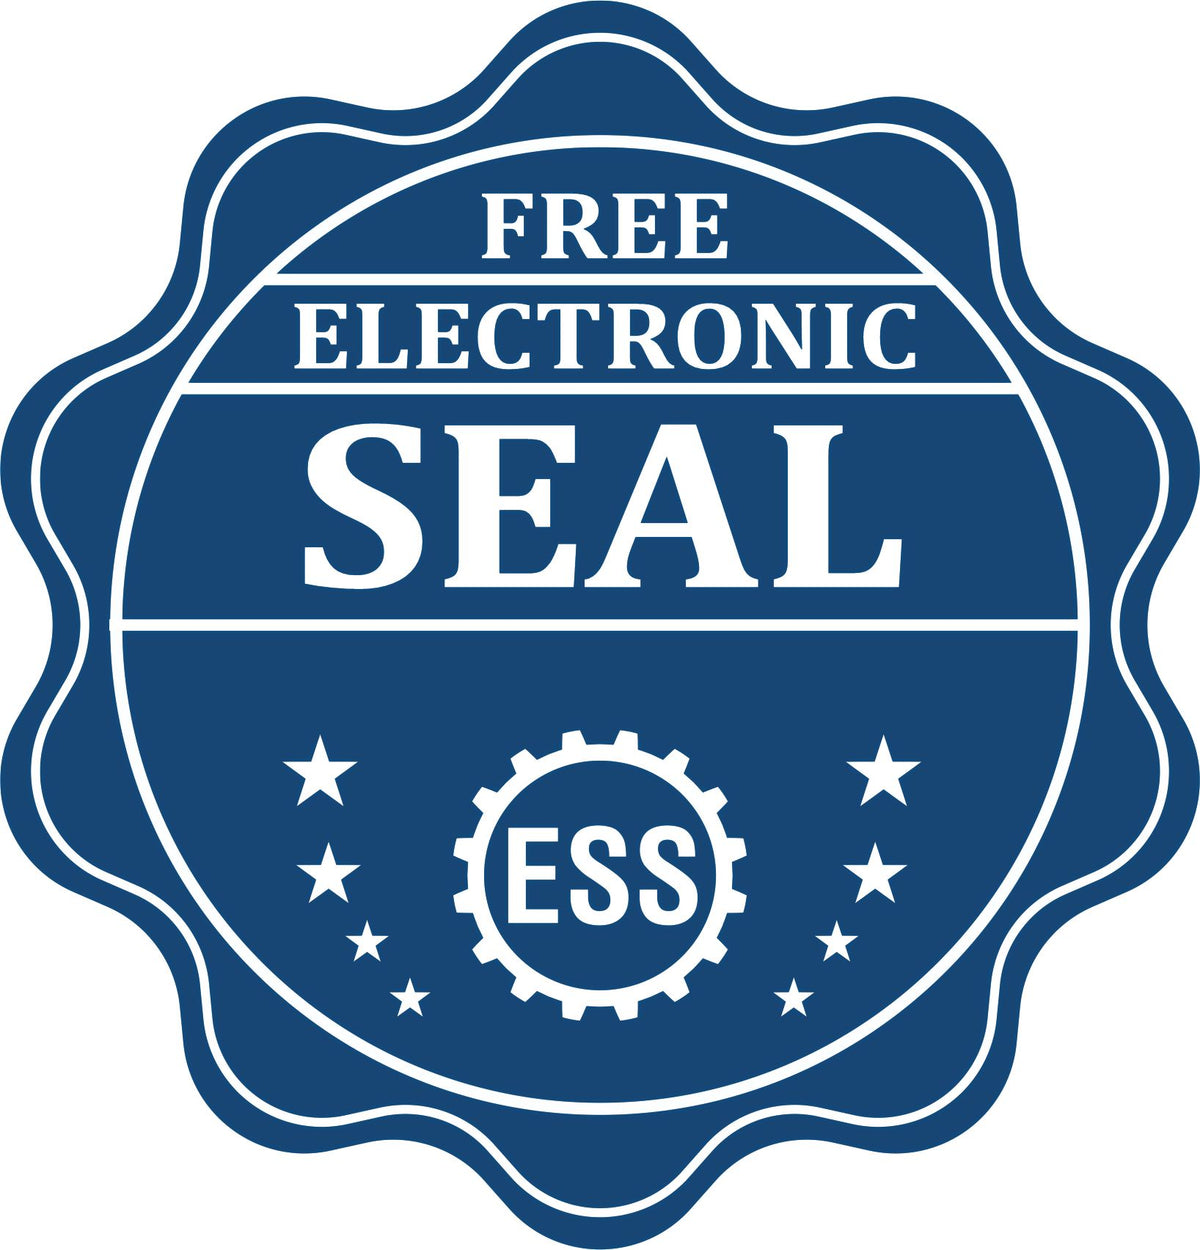 A badge showing a free electronic seal for the Heavy-Duty Puerto Rico Rectangular Notary Stamp with stars and the ESS gear on the emblem.